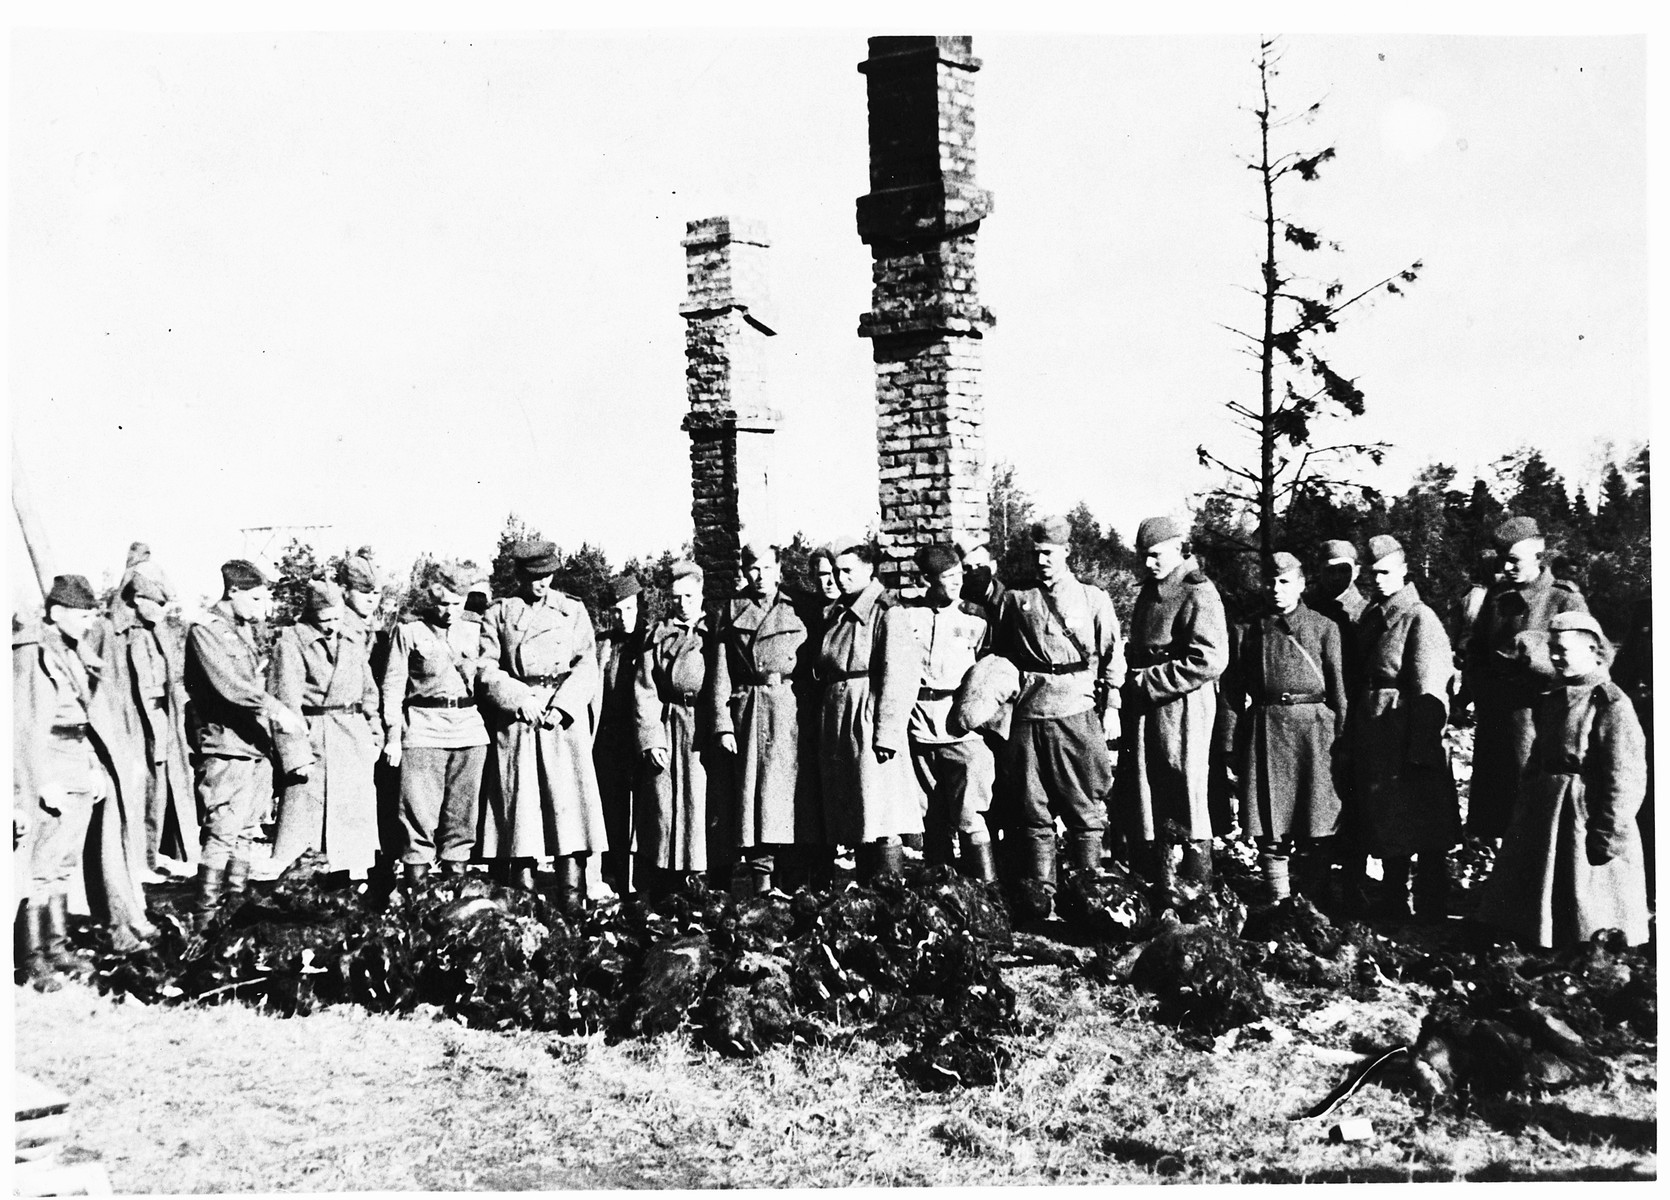 Soviet soldiers and war crimes investigators view the bodies of prisoners that were stacked on a pyre in the Klooga concentration camp.